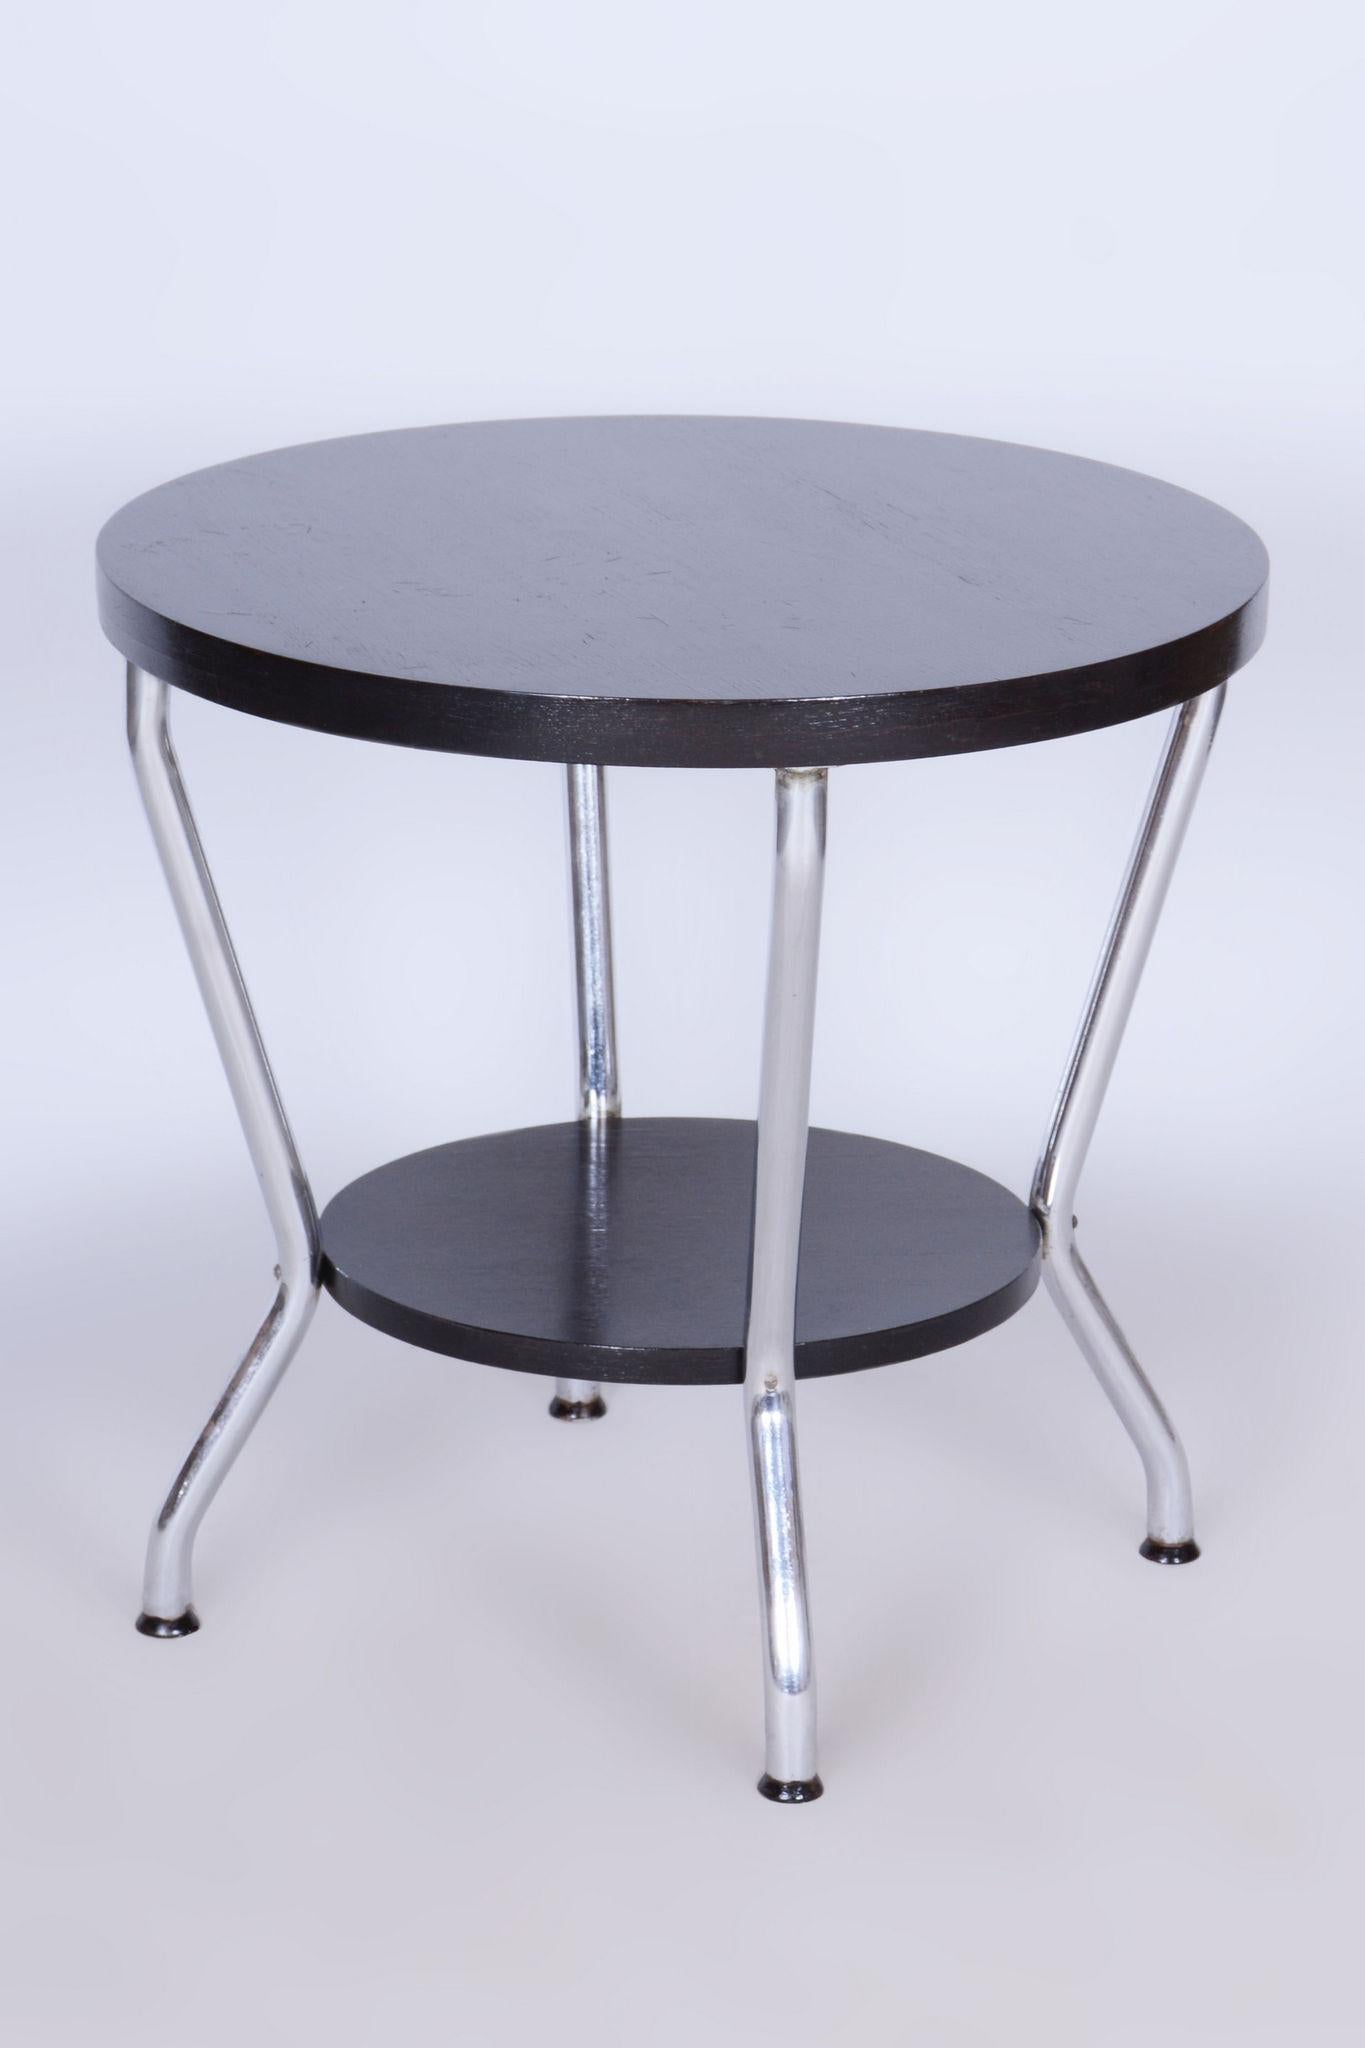 Restored Small Bauhaus Table, by Hynek Gottwald, Oak, Chrome, Czech, 1930s In Good Condition For Sale In Horomerice, CZ